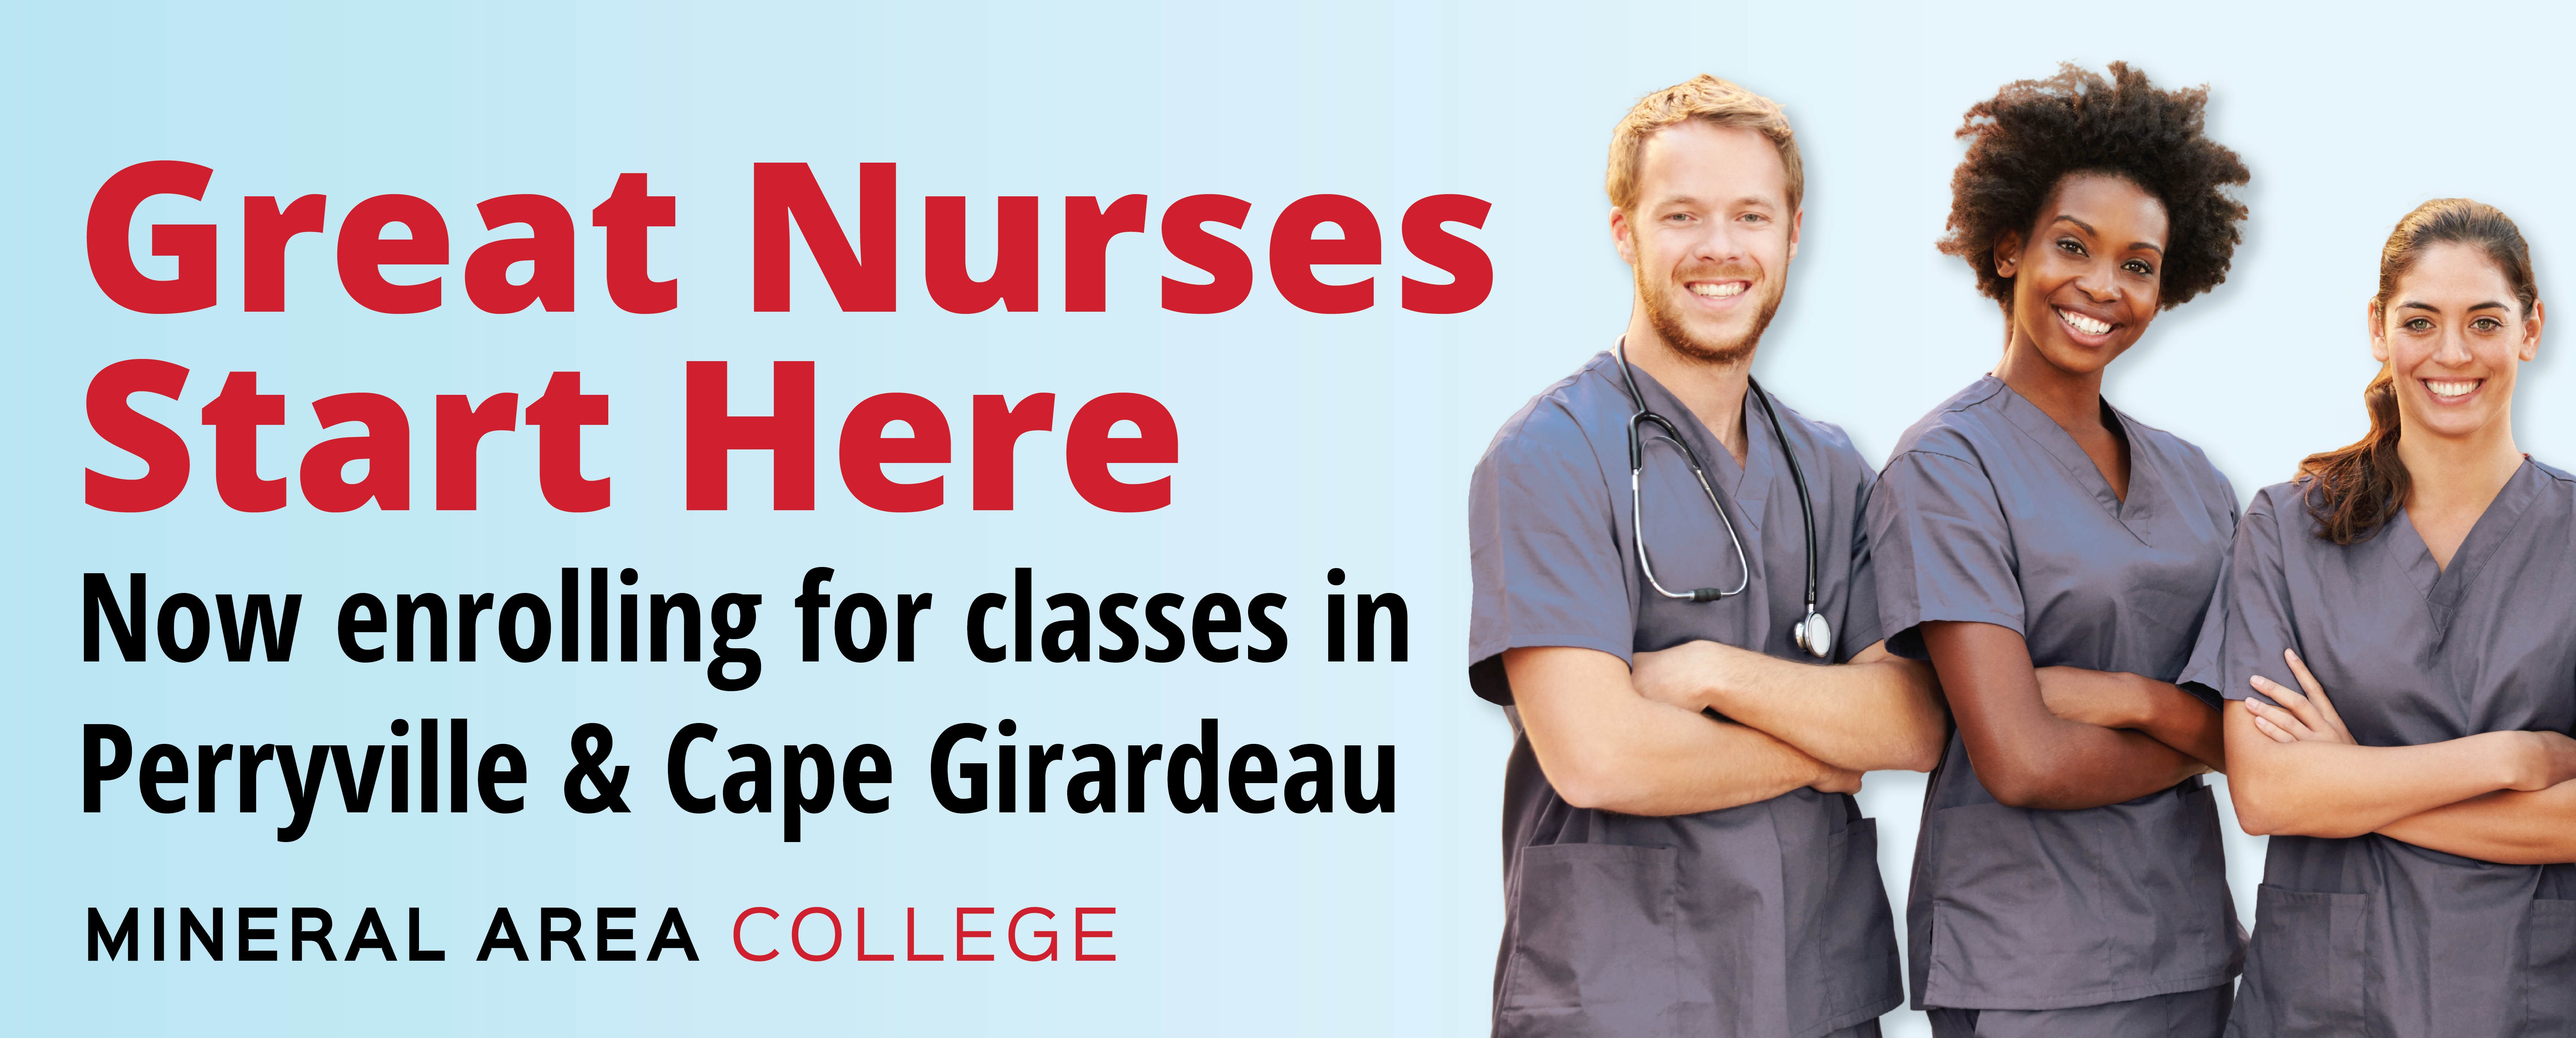 Photo of 3 nurses with Mineral Area College Logo and text Great Nurses Start Here. Now Enrolling for classes in Perryville & Cape Girardeau.